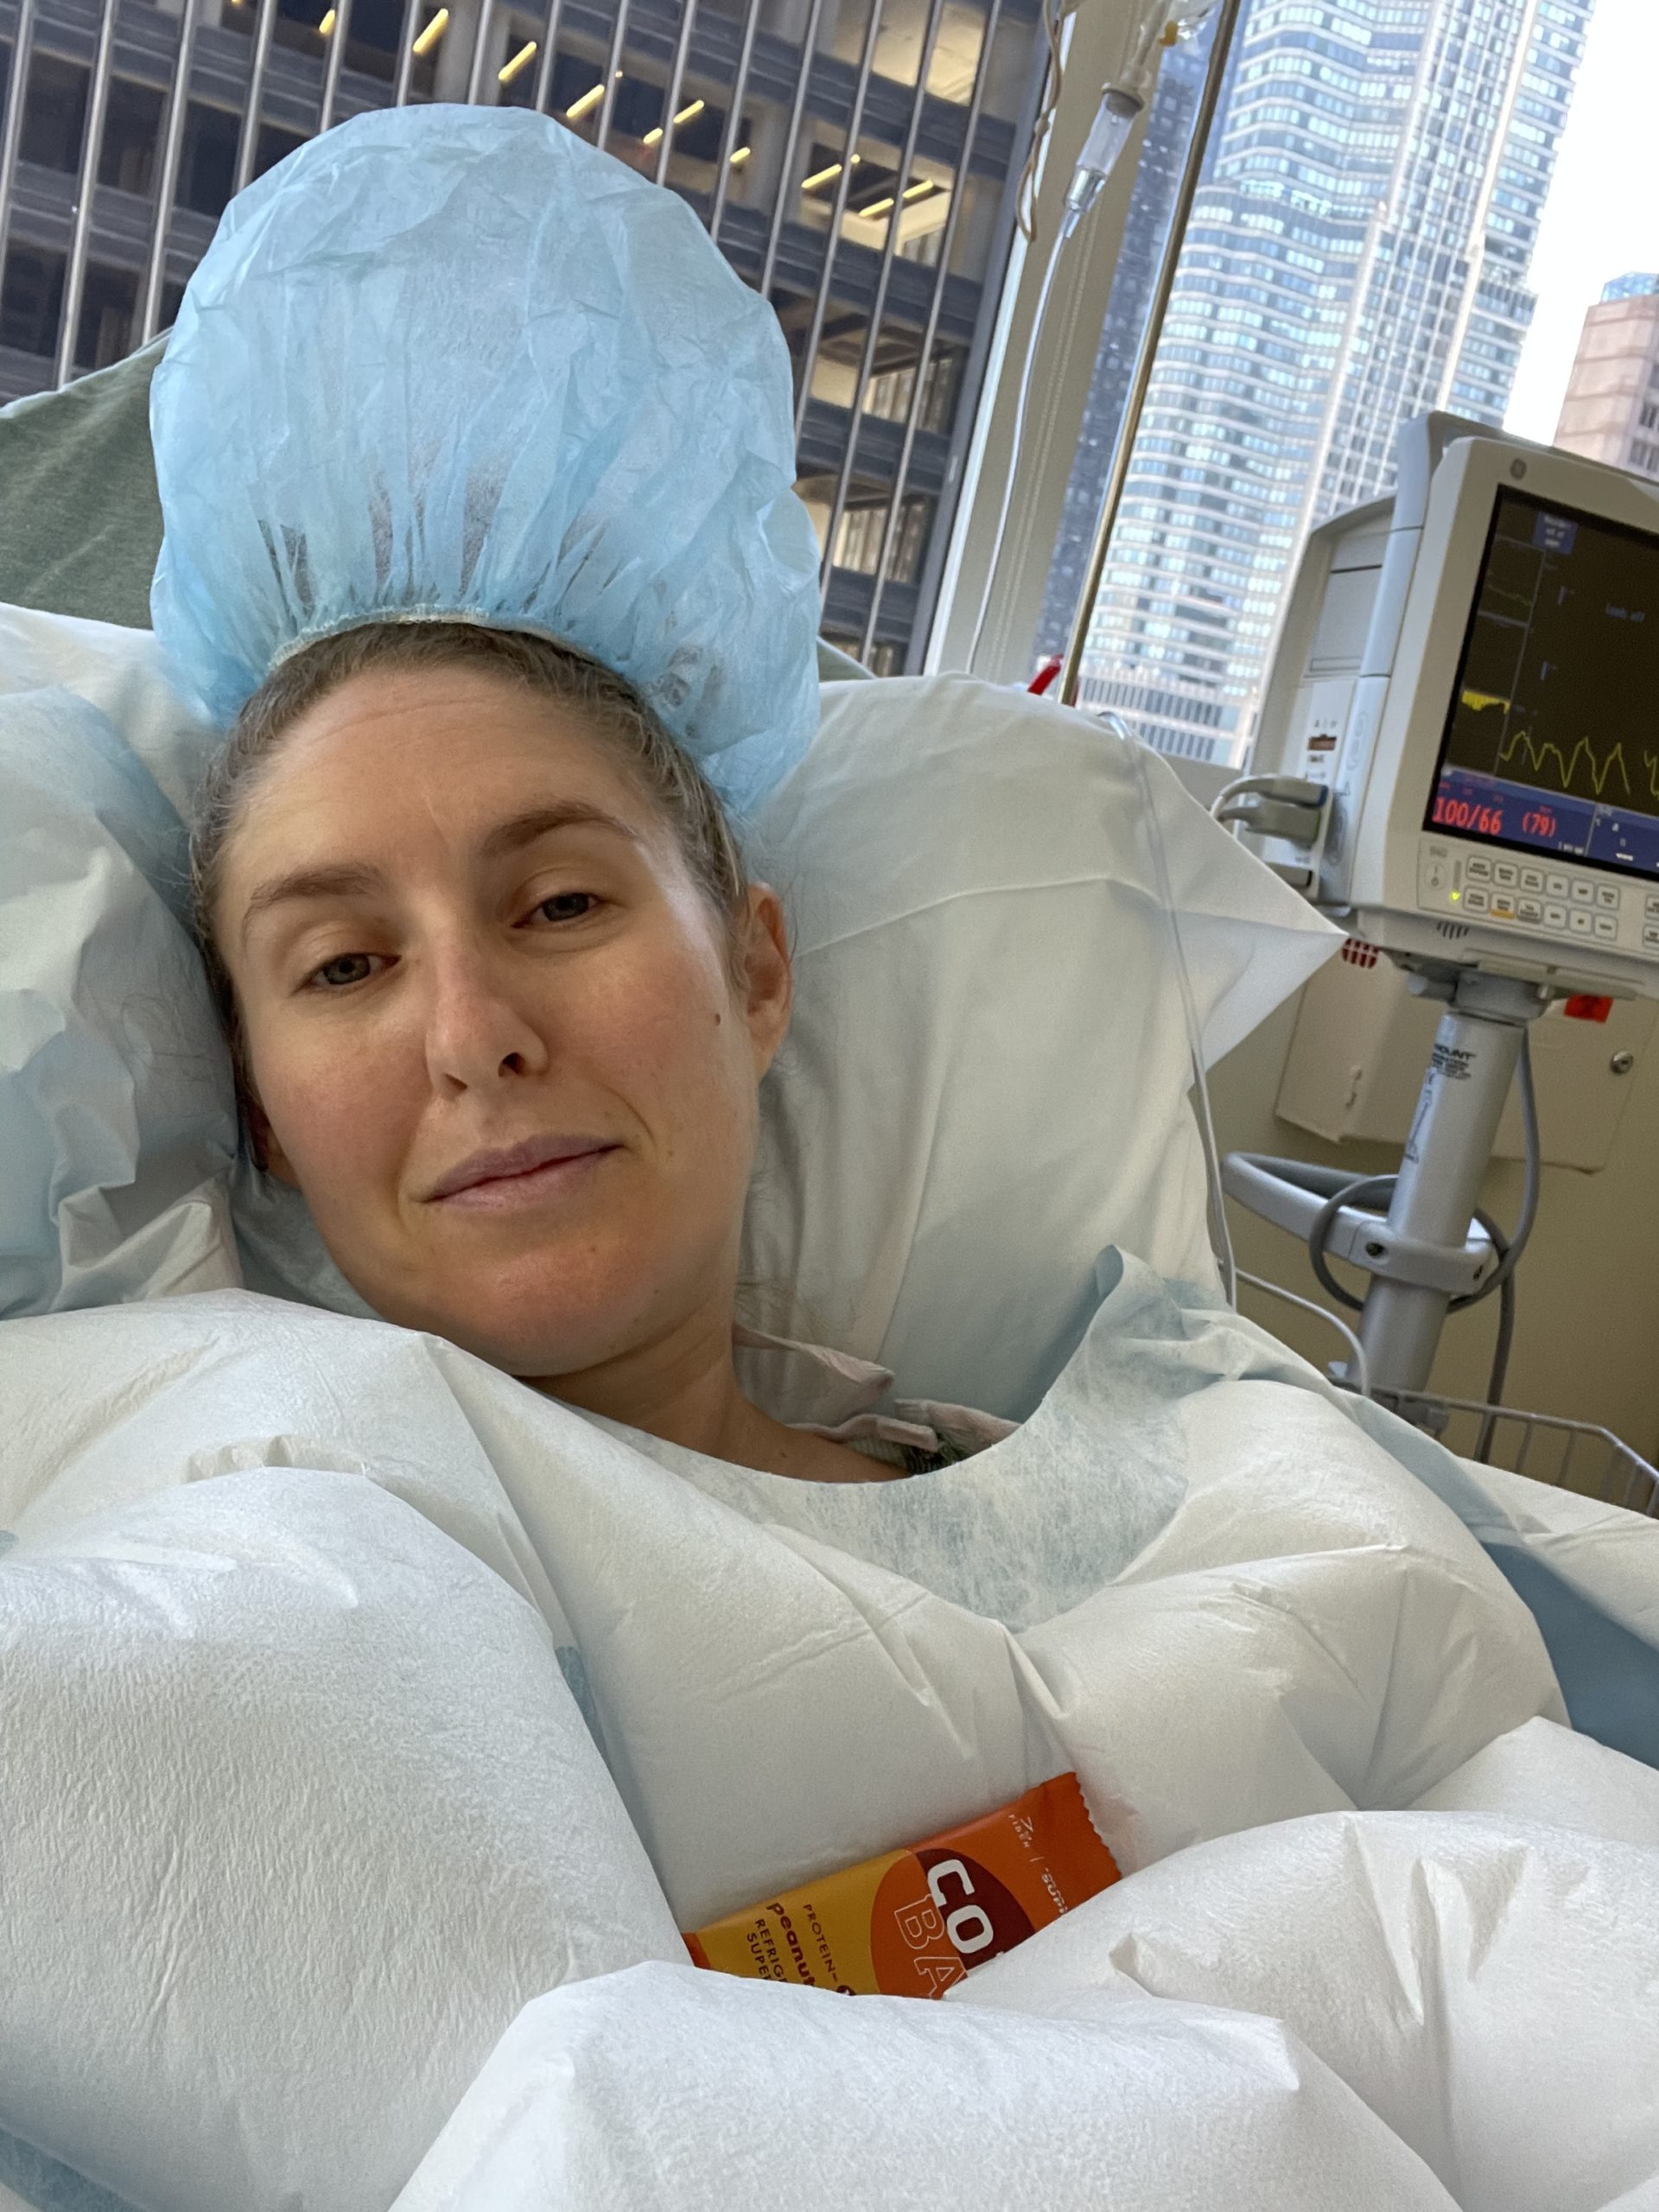 Woman in hospital gown and bonnet after egg retrieval recovering